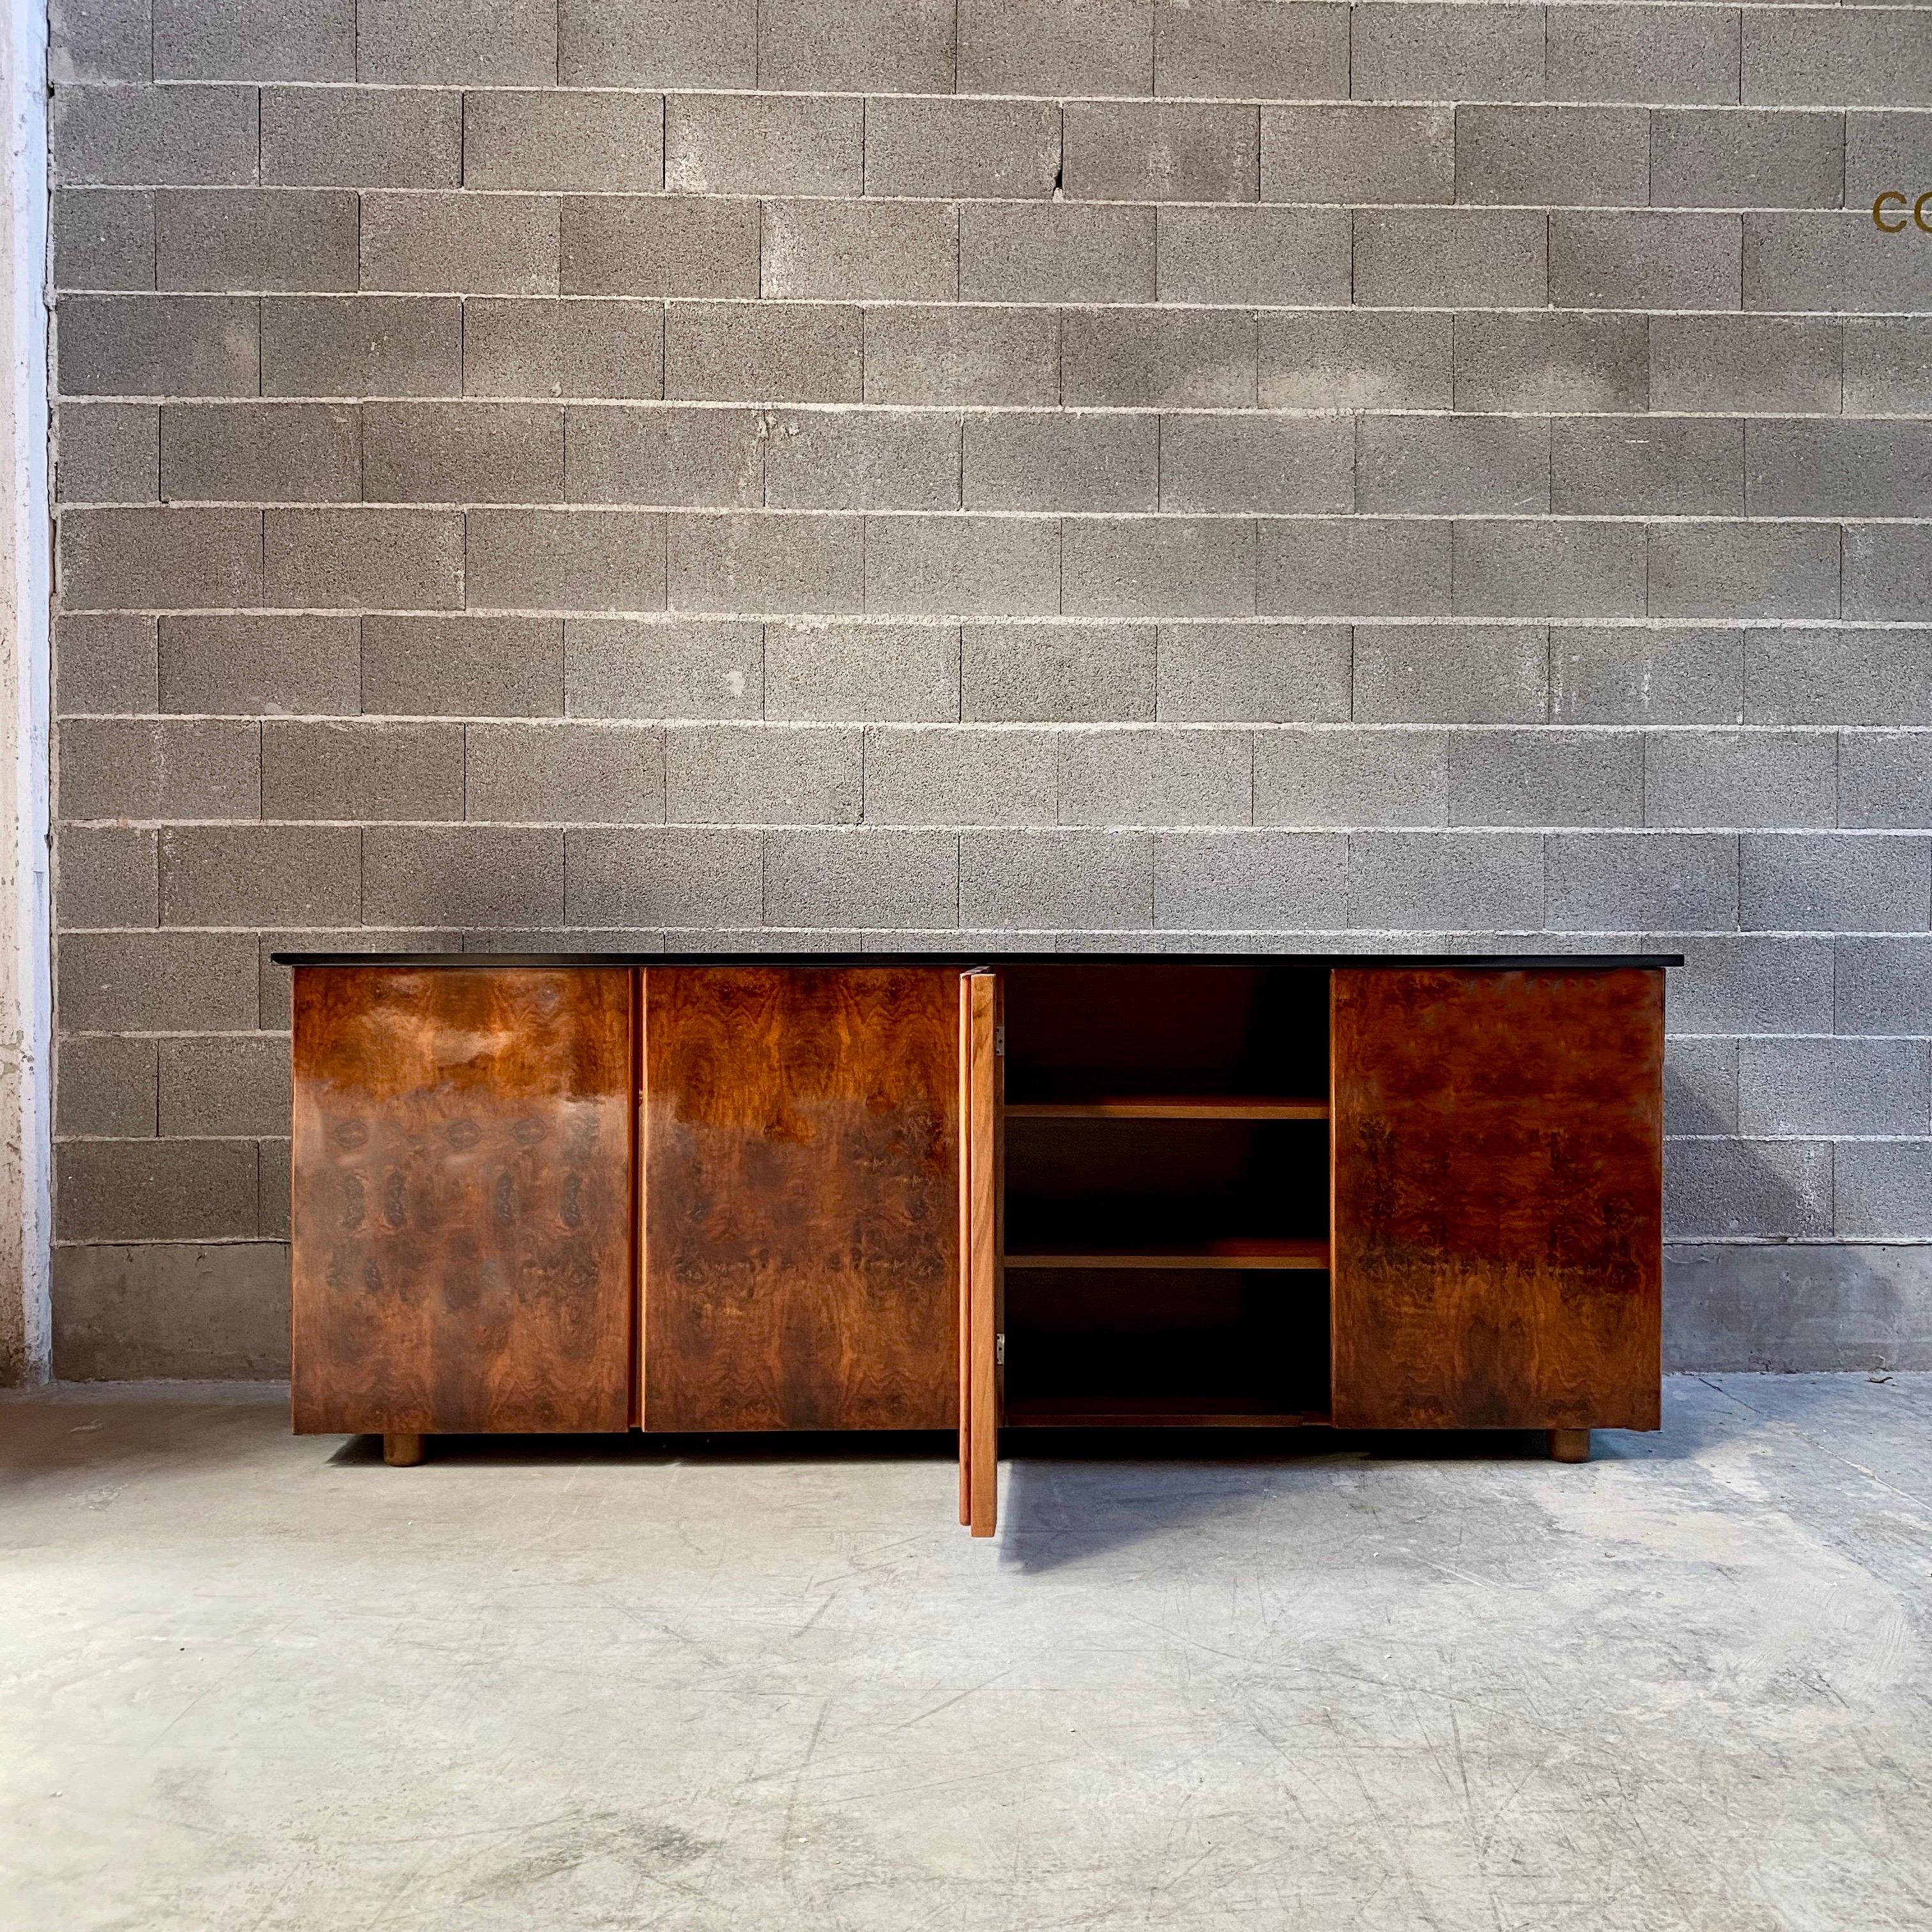 Luigi Caccia Dominioni Burl sideboard for Azucena, 1978

Combining a novel technical solution, a strong chromatic statement and rounded contours, Caccia Dominioni set a new standard for modern design in its clear insistence on the compactness of